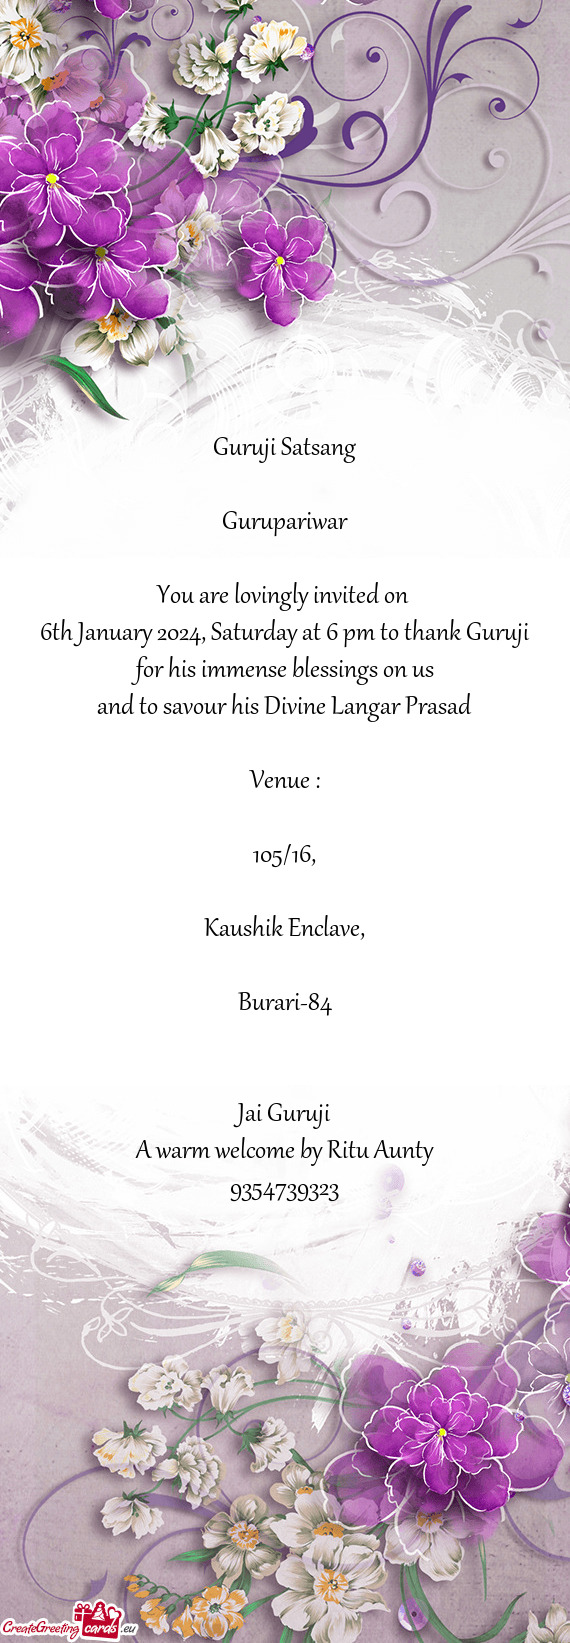 6th January 2024, Saturday at 6 pm to thank Guruji for his immense blessings on us